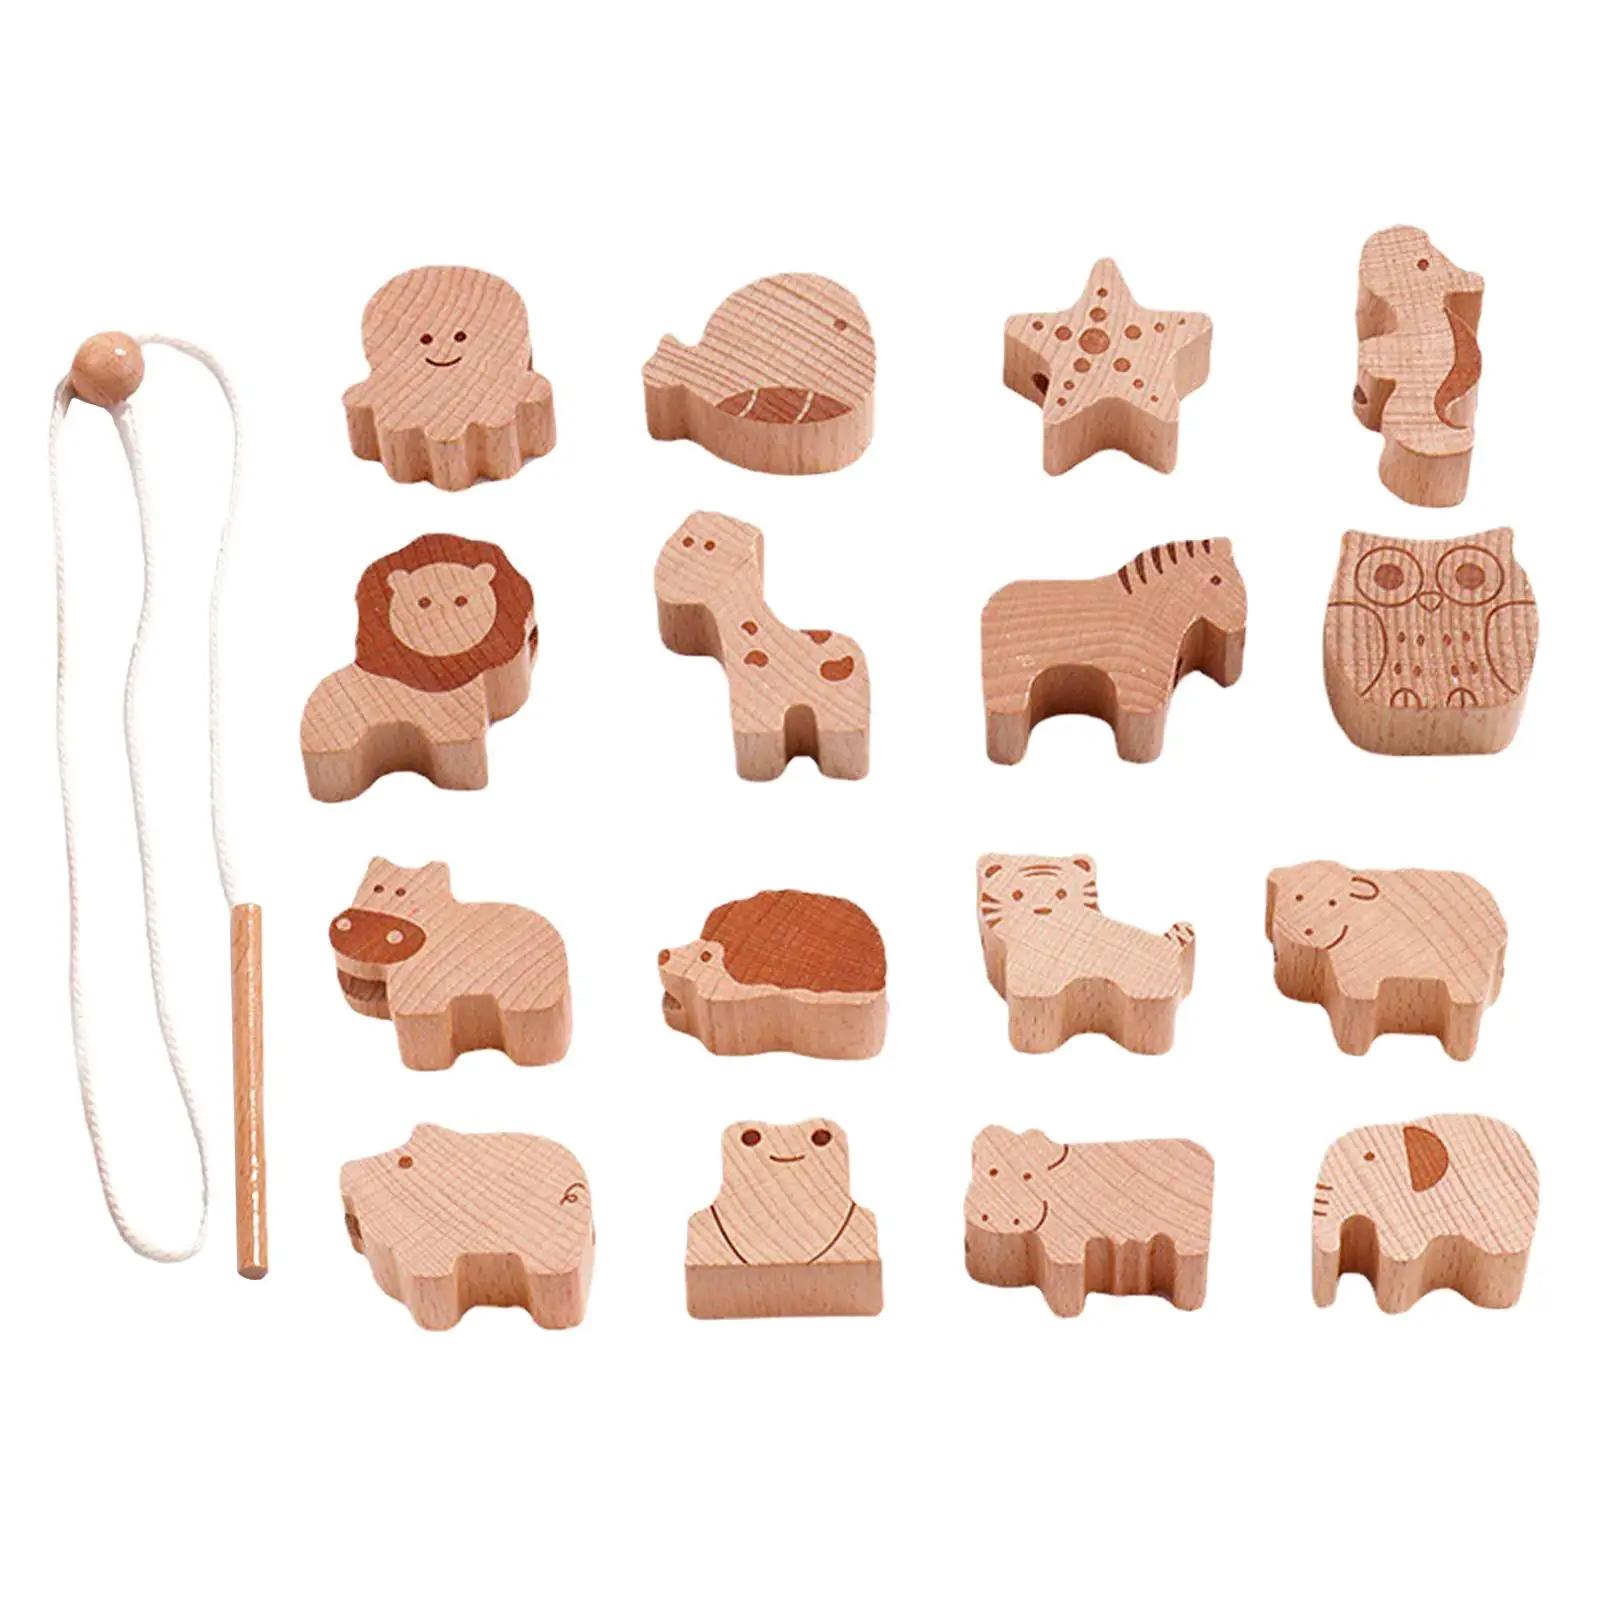 Wooden Lacing Beads Toys Fine Motor Skills Preschool Activities Animals Blocks Learning Toys for Children Toddlers Holiday Gifts